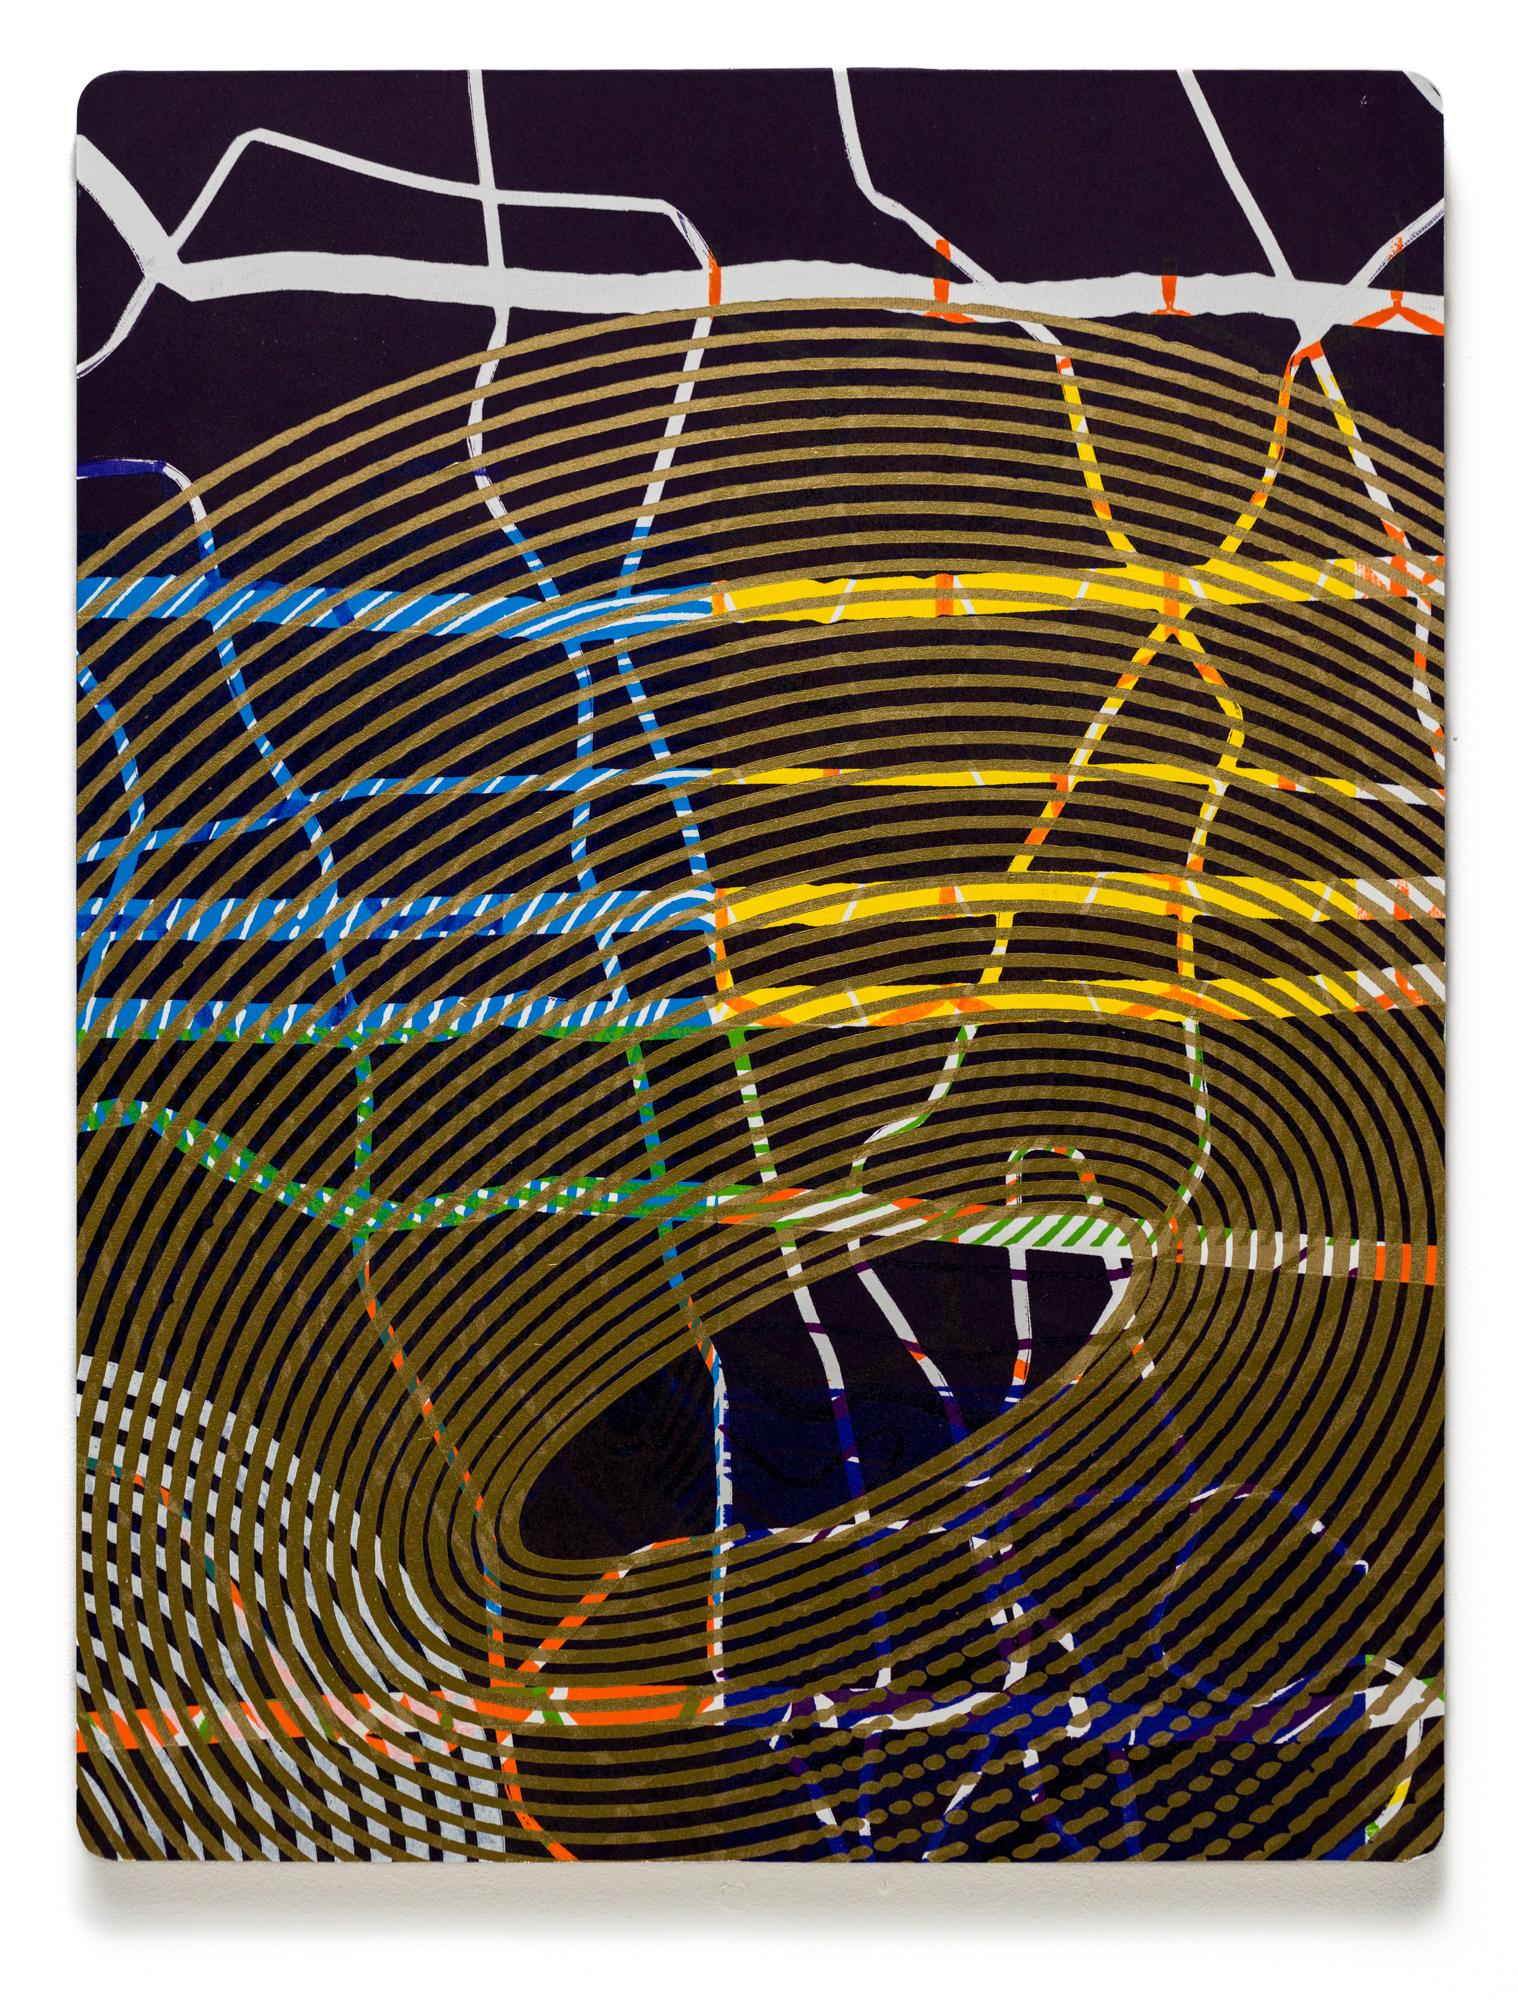 Alexis Nutini Abstract Print - "Oldies Swing", Abstract Patterns, Geometric Abstraction, Woodcut, Monoprint